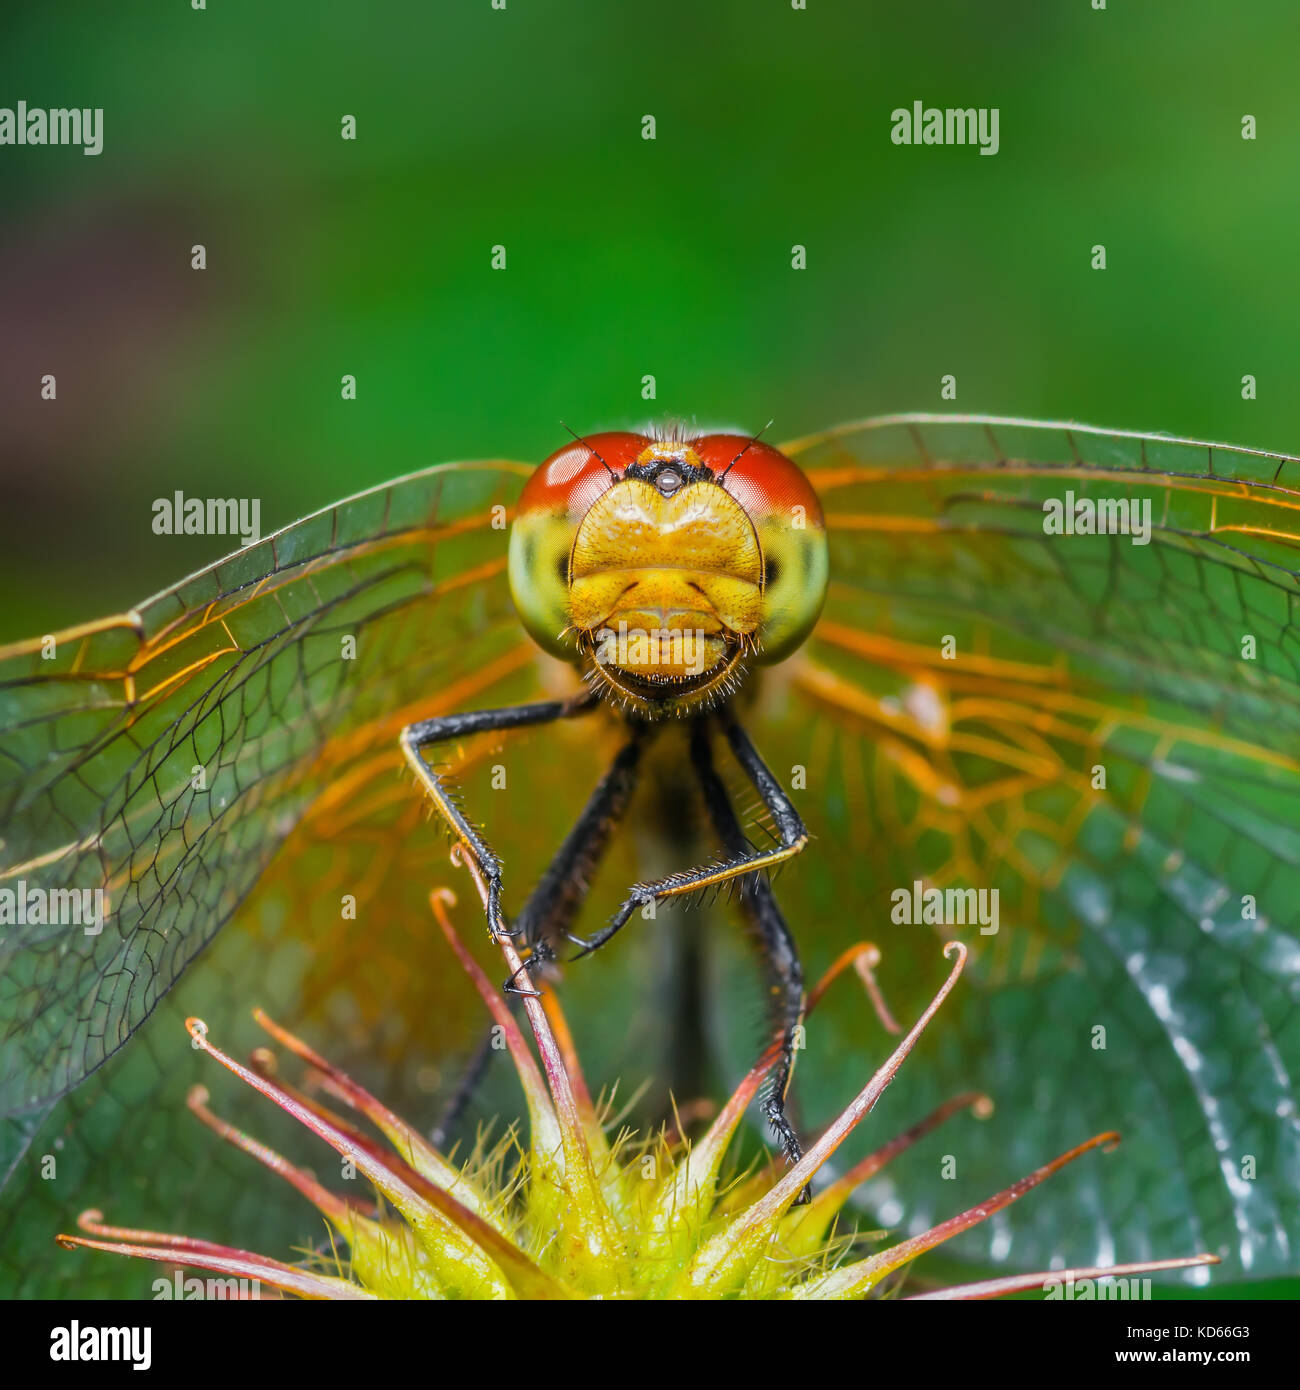 Dragonfly Insect Macro Portrait on Green Background Stock Photo